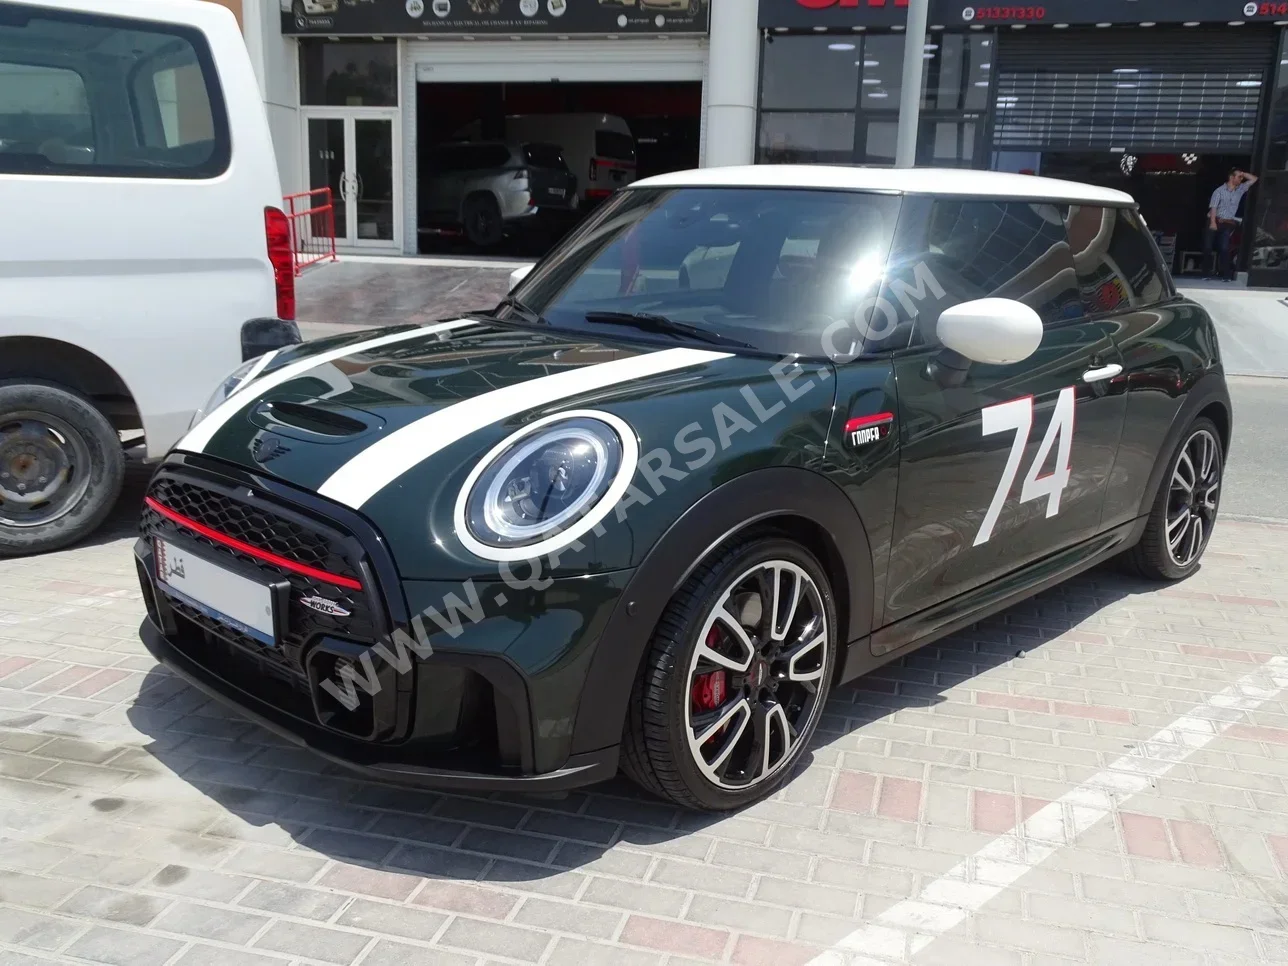 Mini  Cooper  JCW  2022  Automatic  25,000 Km  4 Cylinder  Front Wheel Drive (FWD)  Hatchback  Green  With Warranty